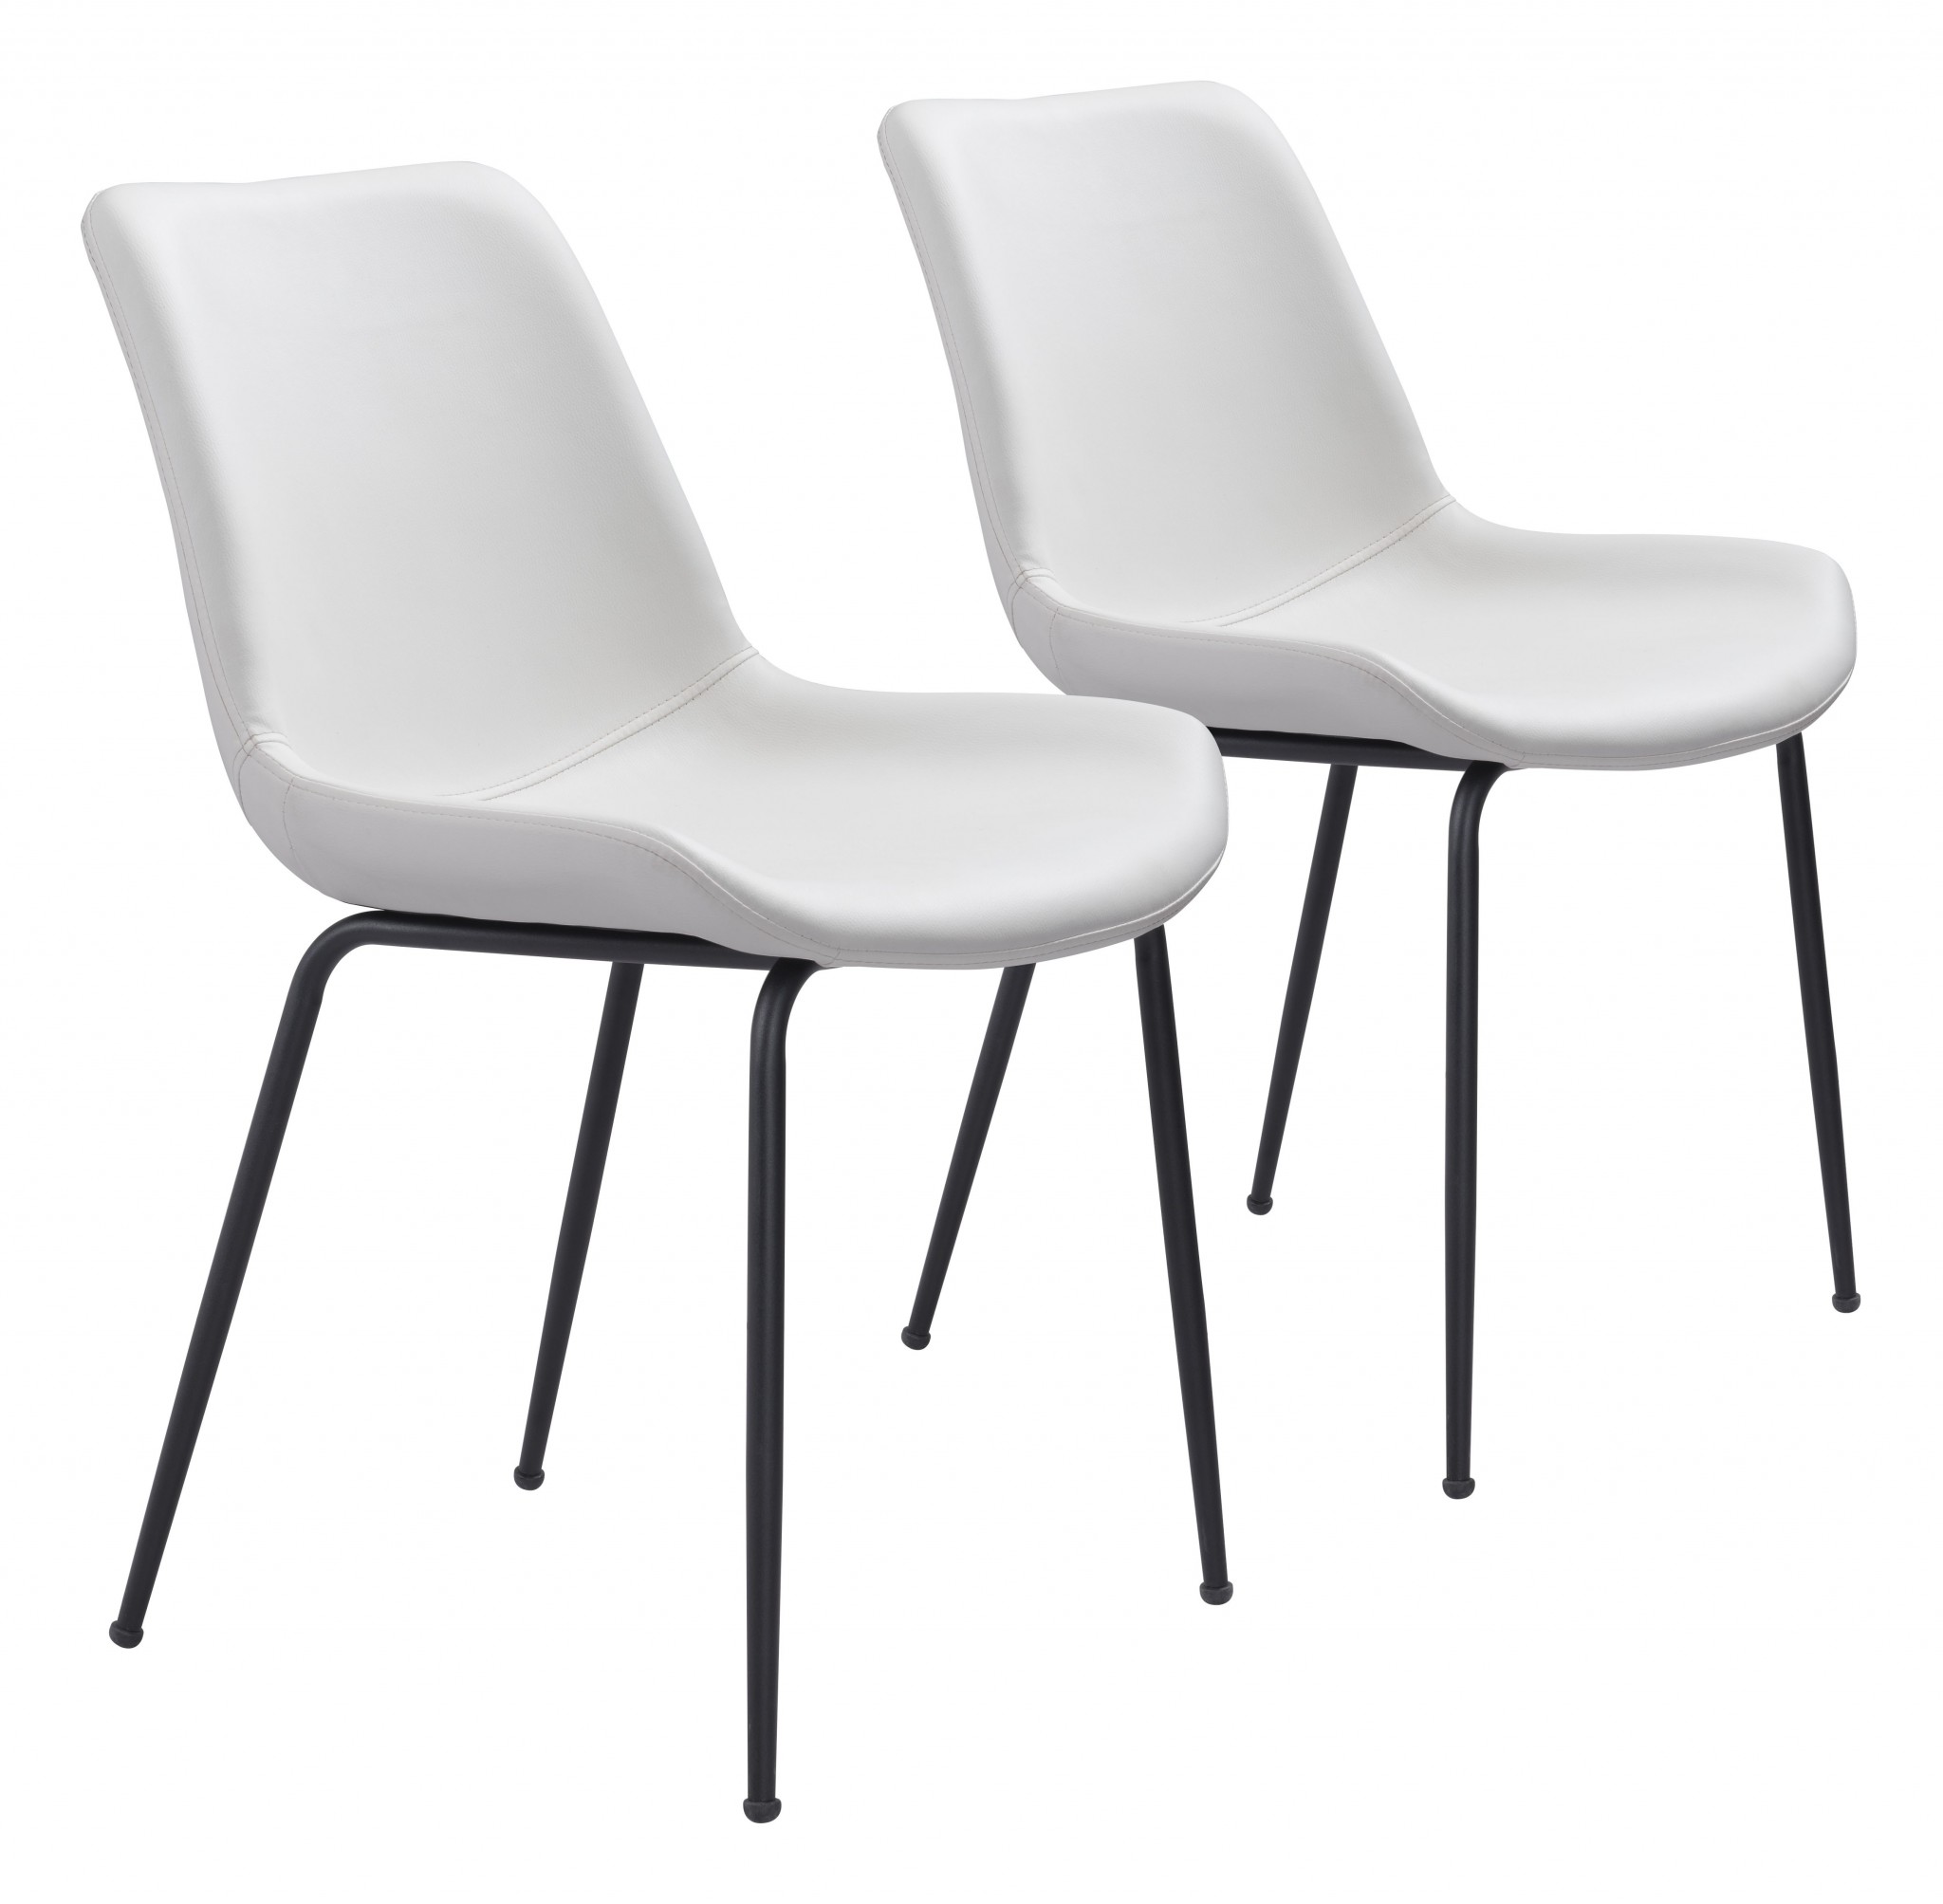 Set of Two White and Black Top Shelf Modern Rugged Dining Chairs